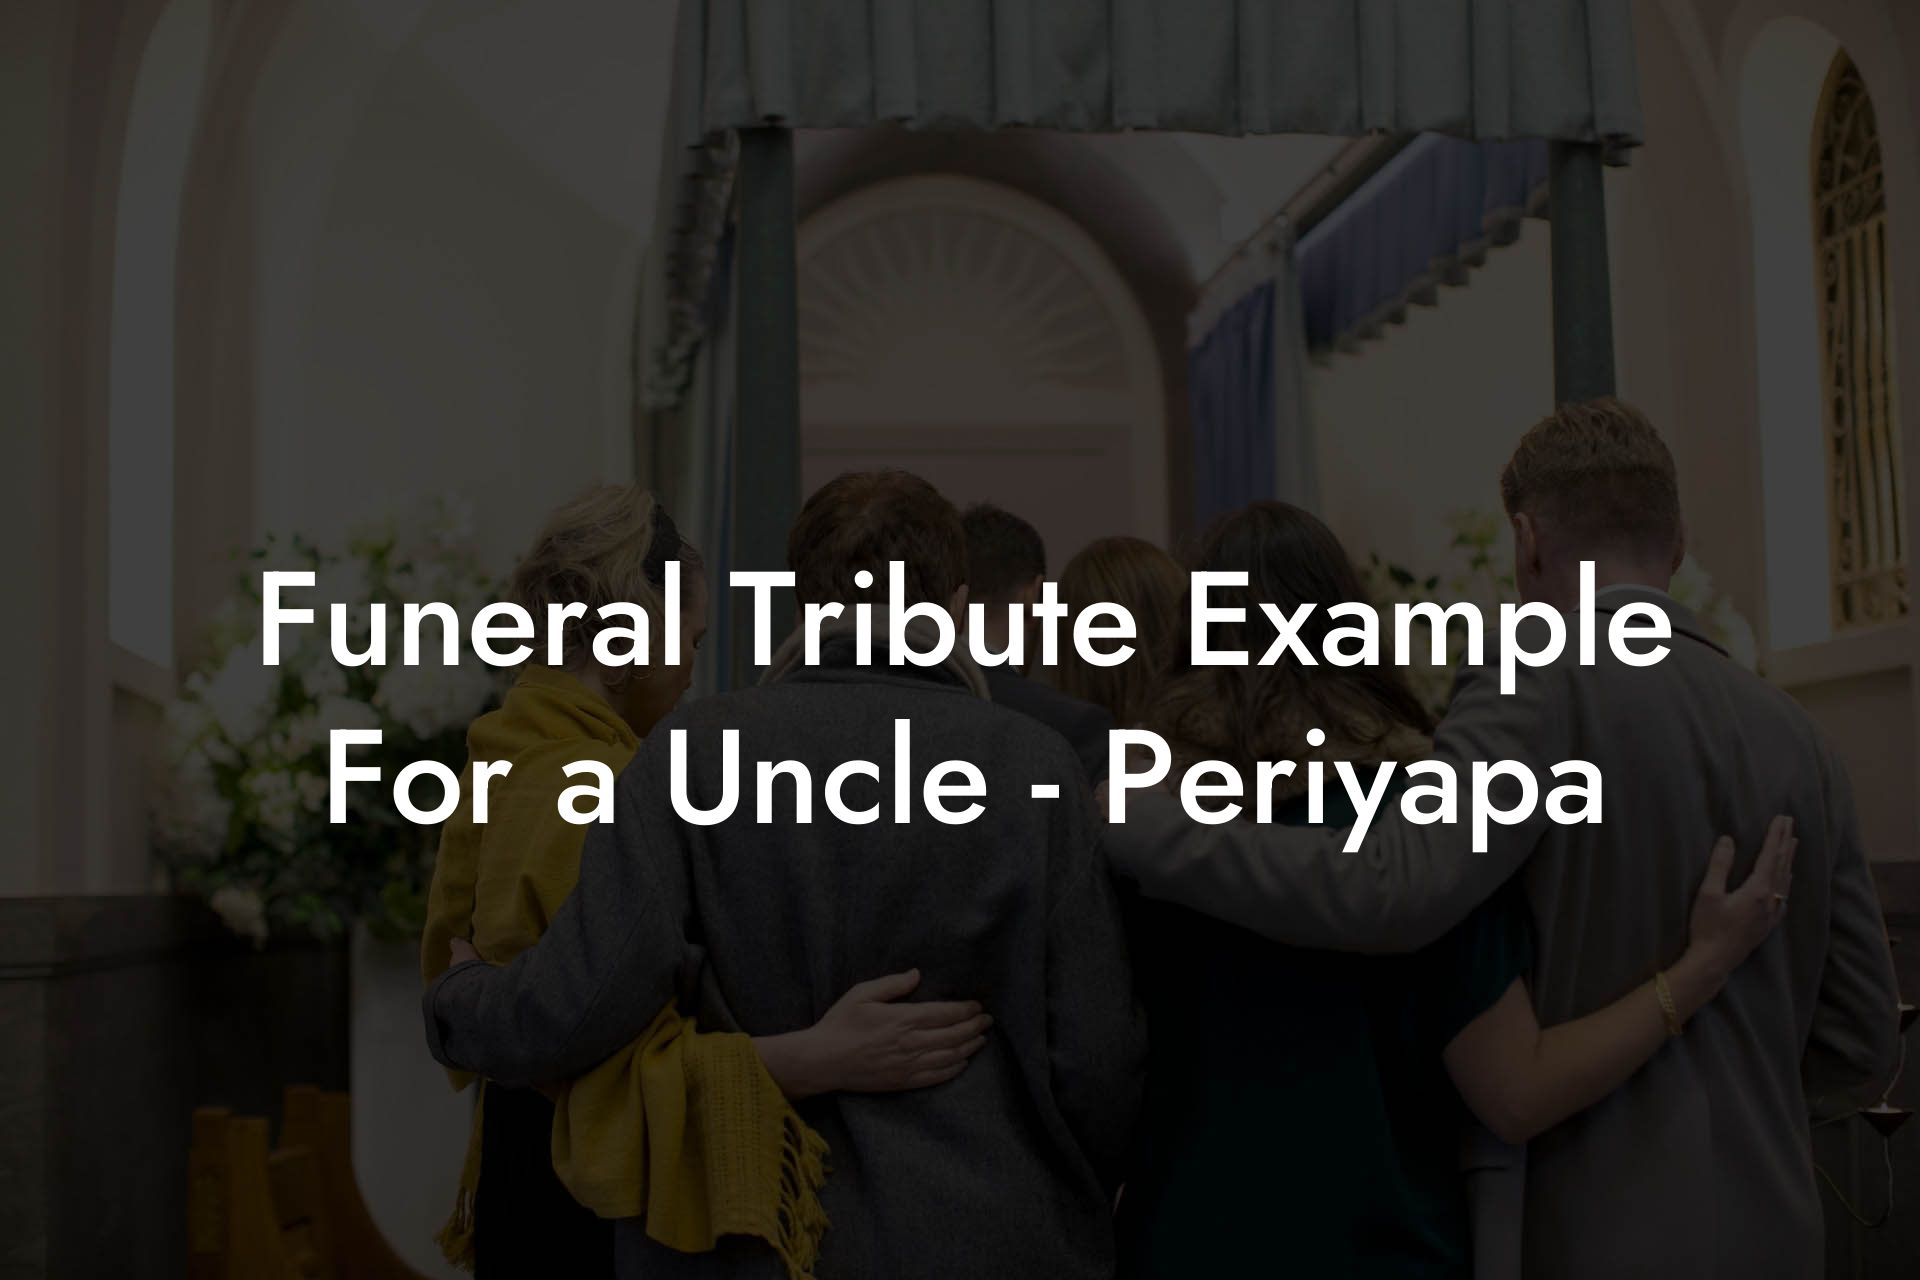 Funeral Tribute Example For a Uncle - Periyapa